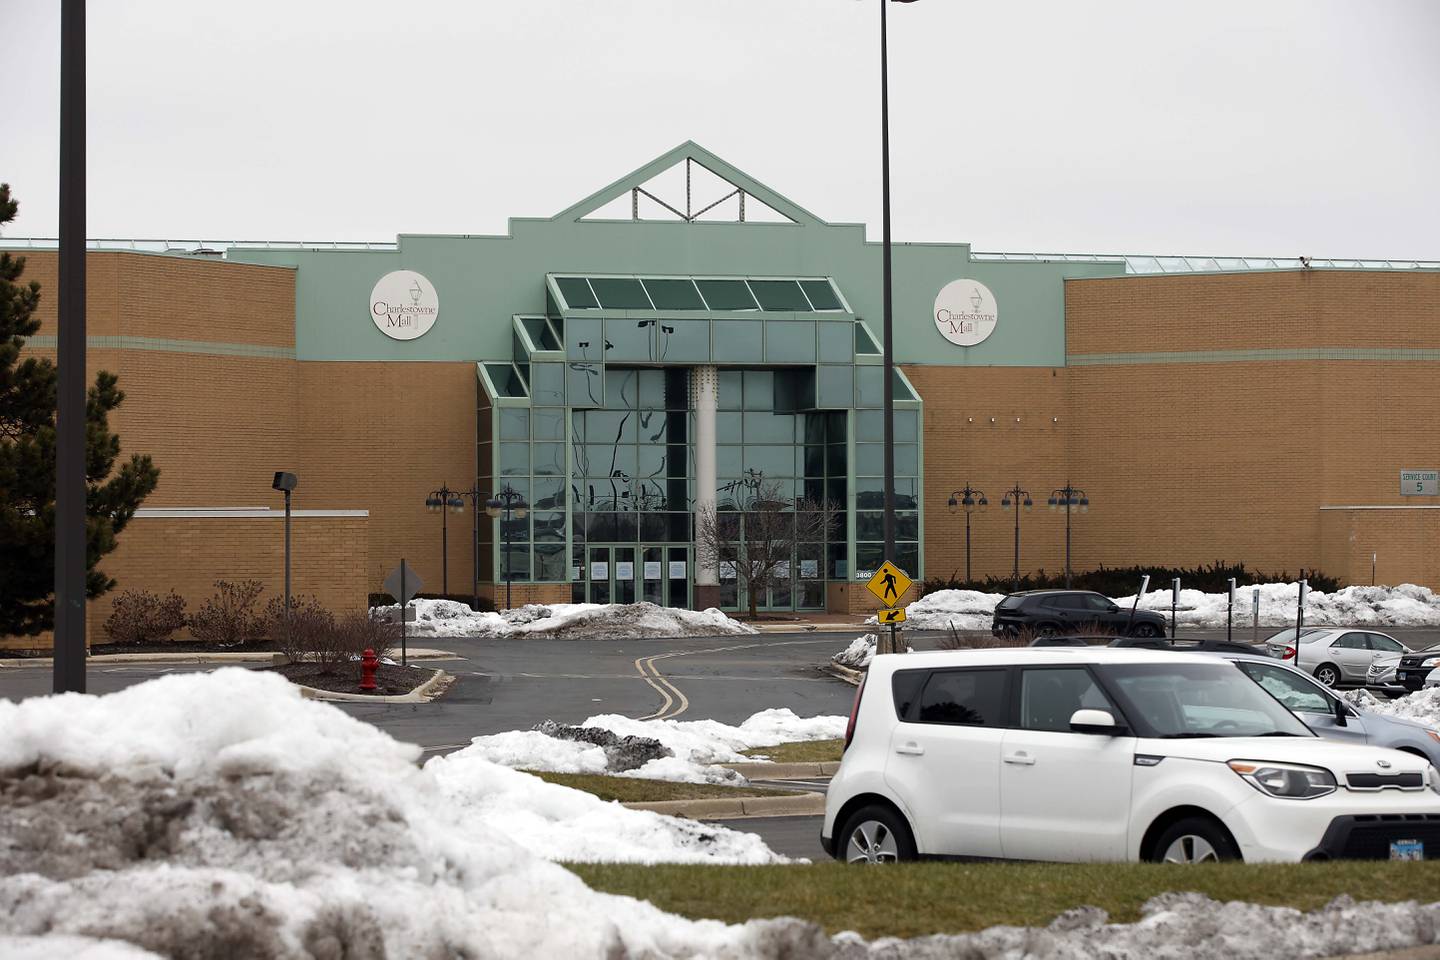 City officials are hopeful this will be the year they see redevelopment plans for the shuttered Charlestowne Mall.